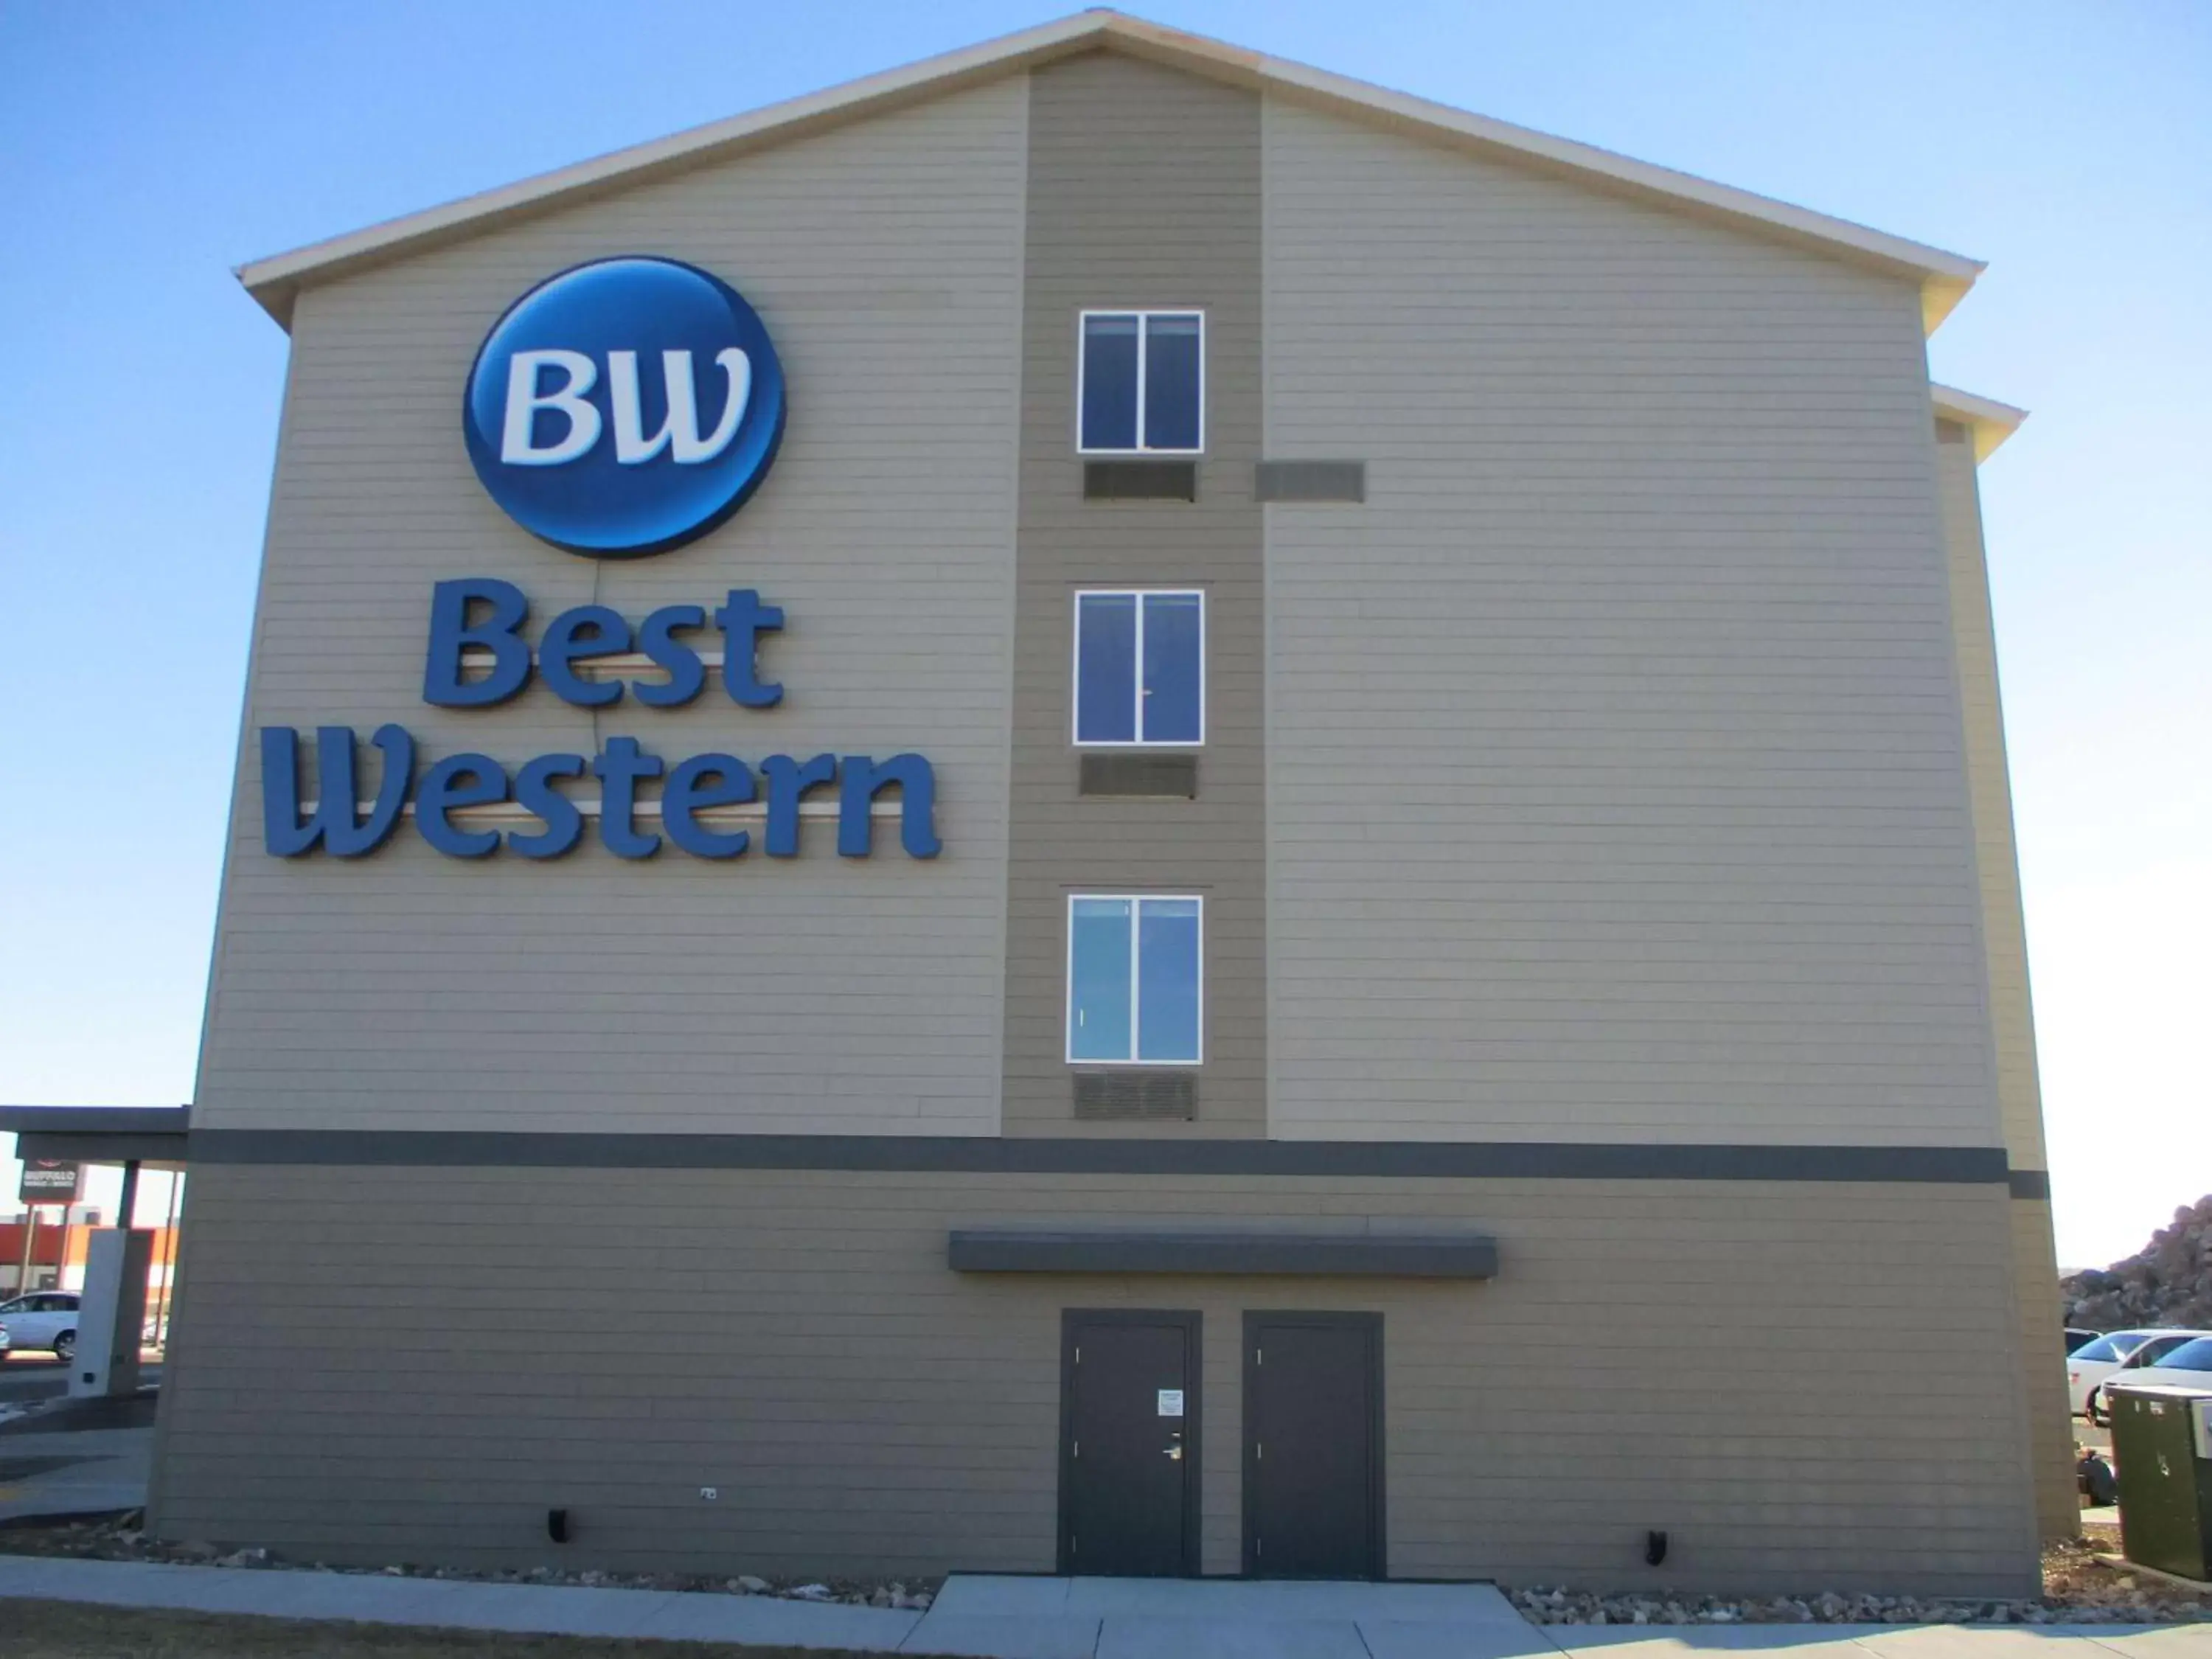 Property Building in Best Western Roosevelt Place